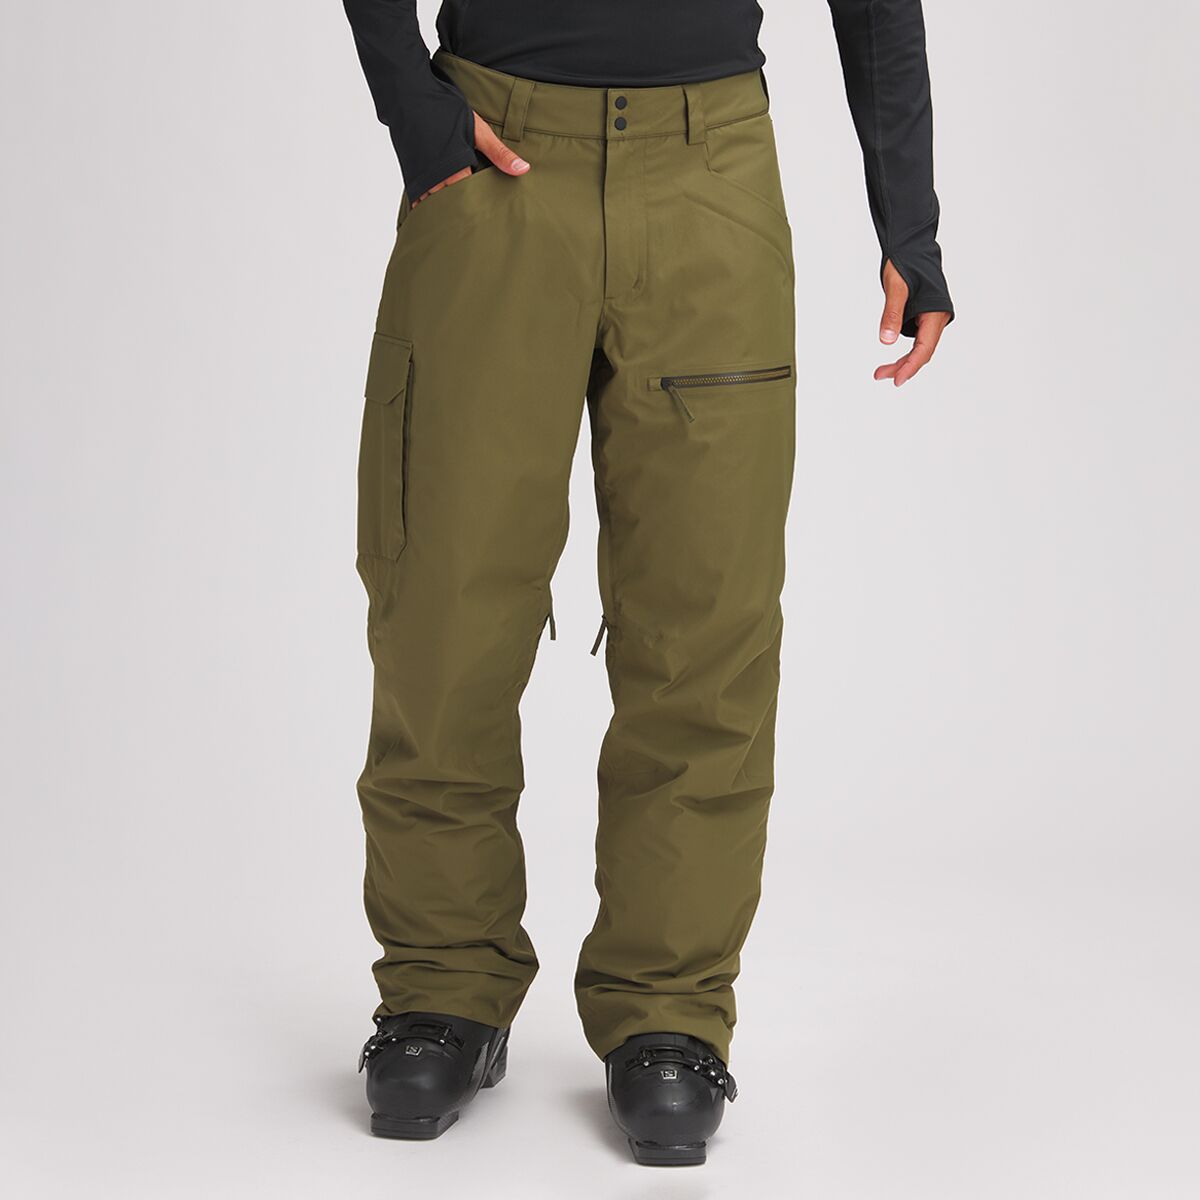 Insulated Snow Pant - Men